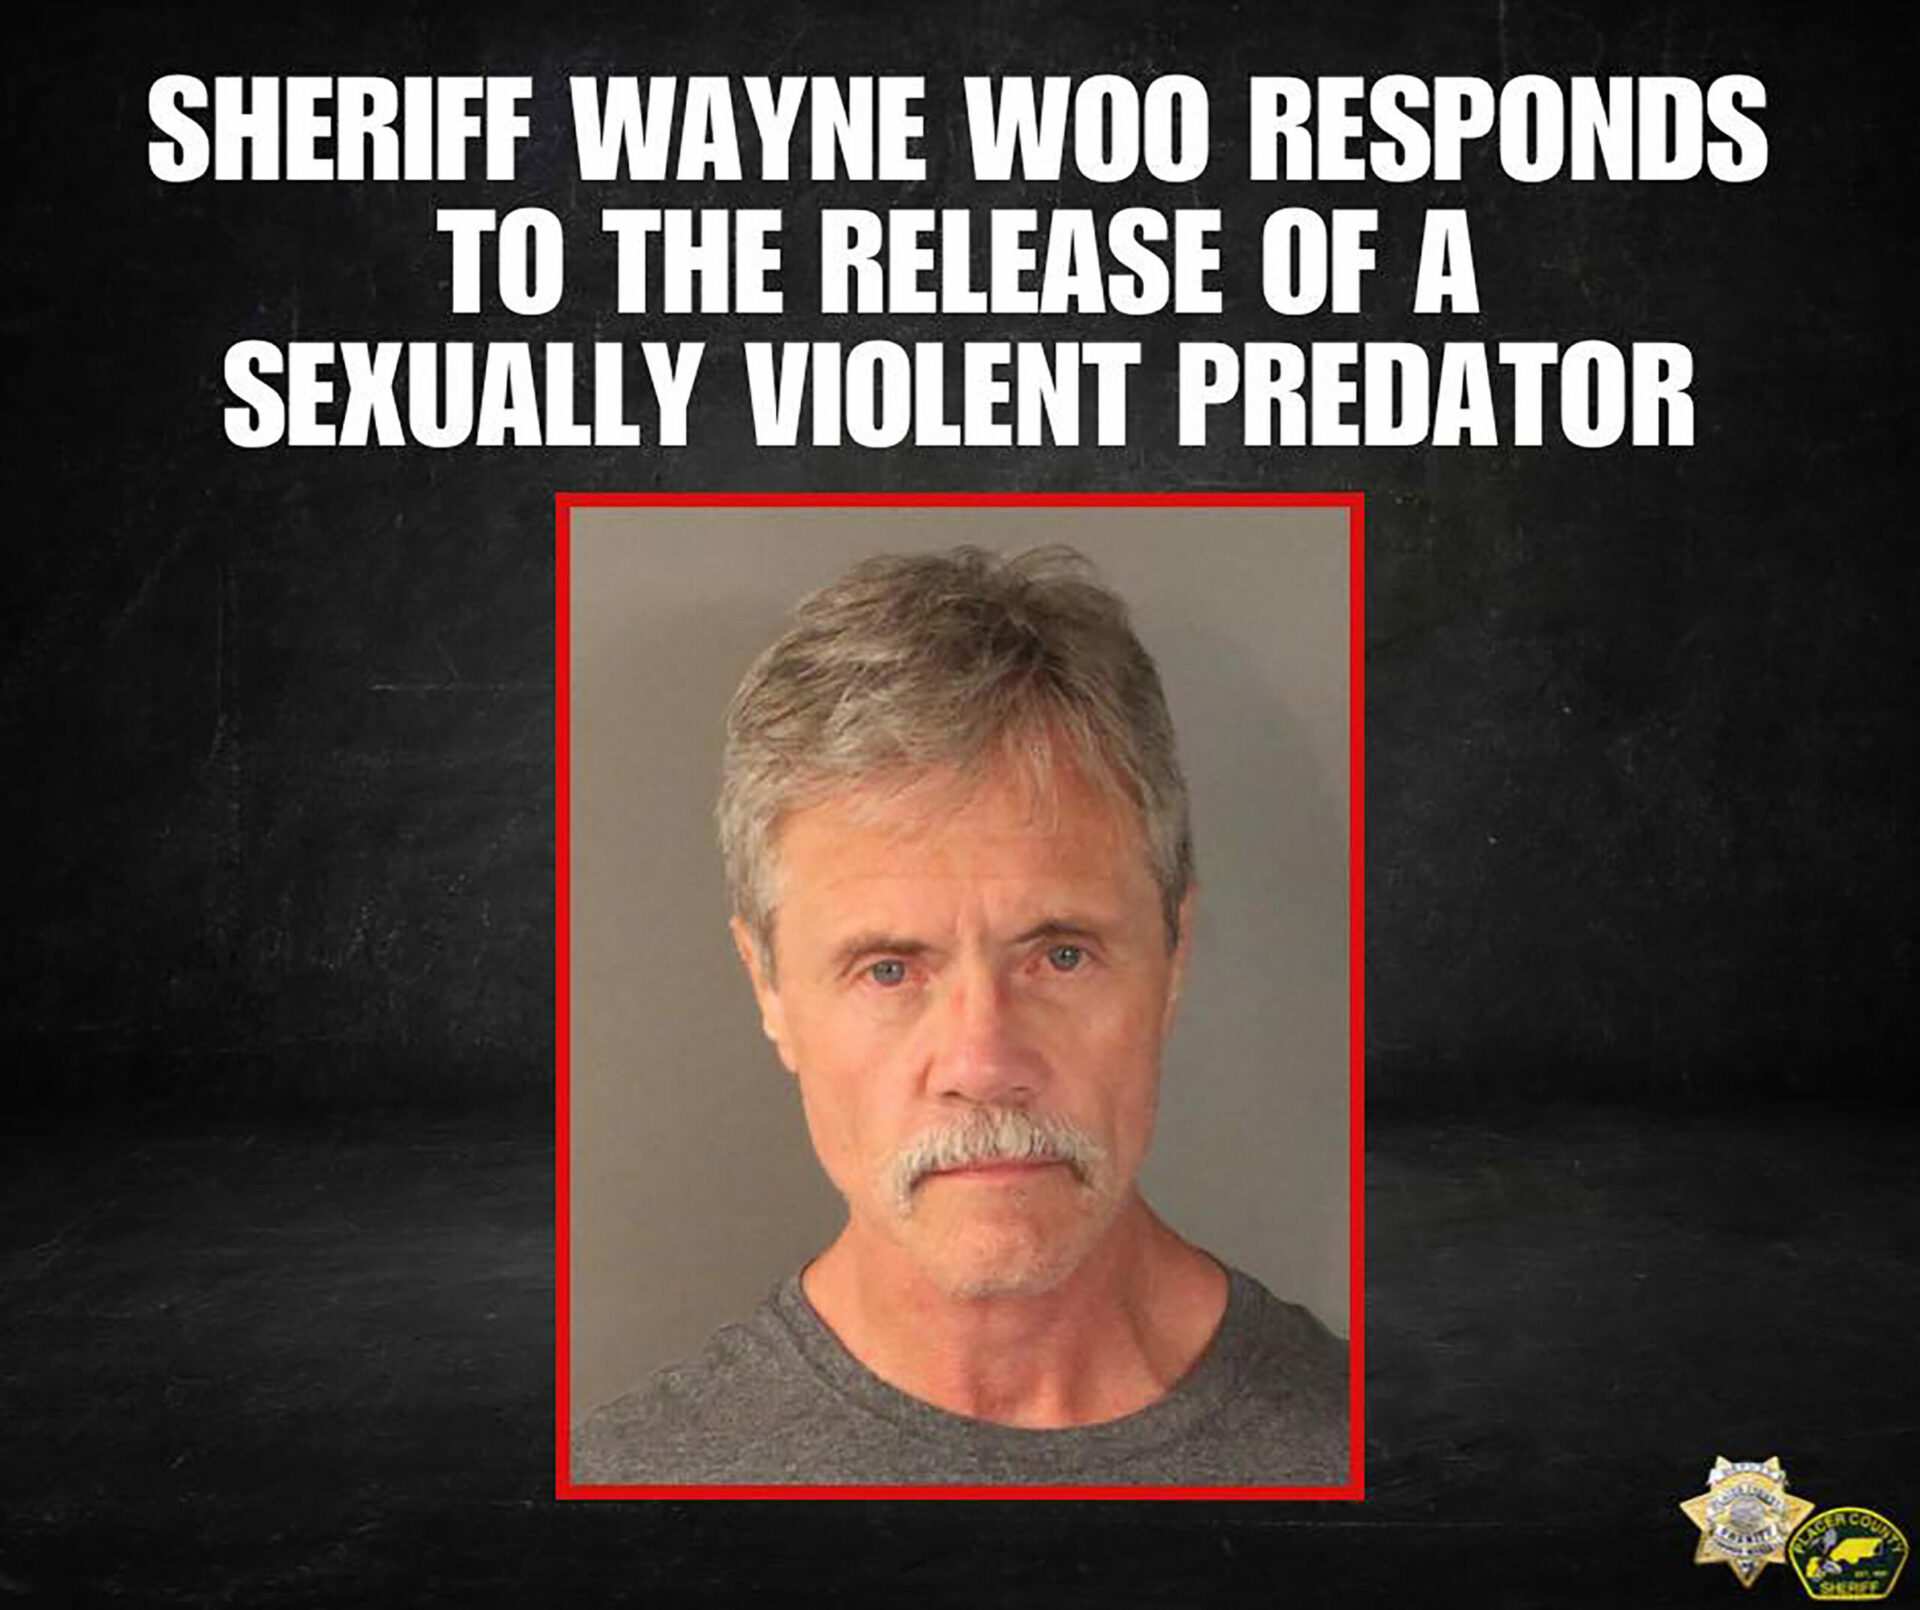 A violent sexual predator may be released in California. A new law has caused issues